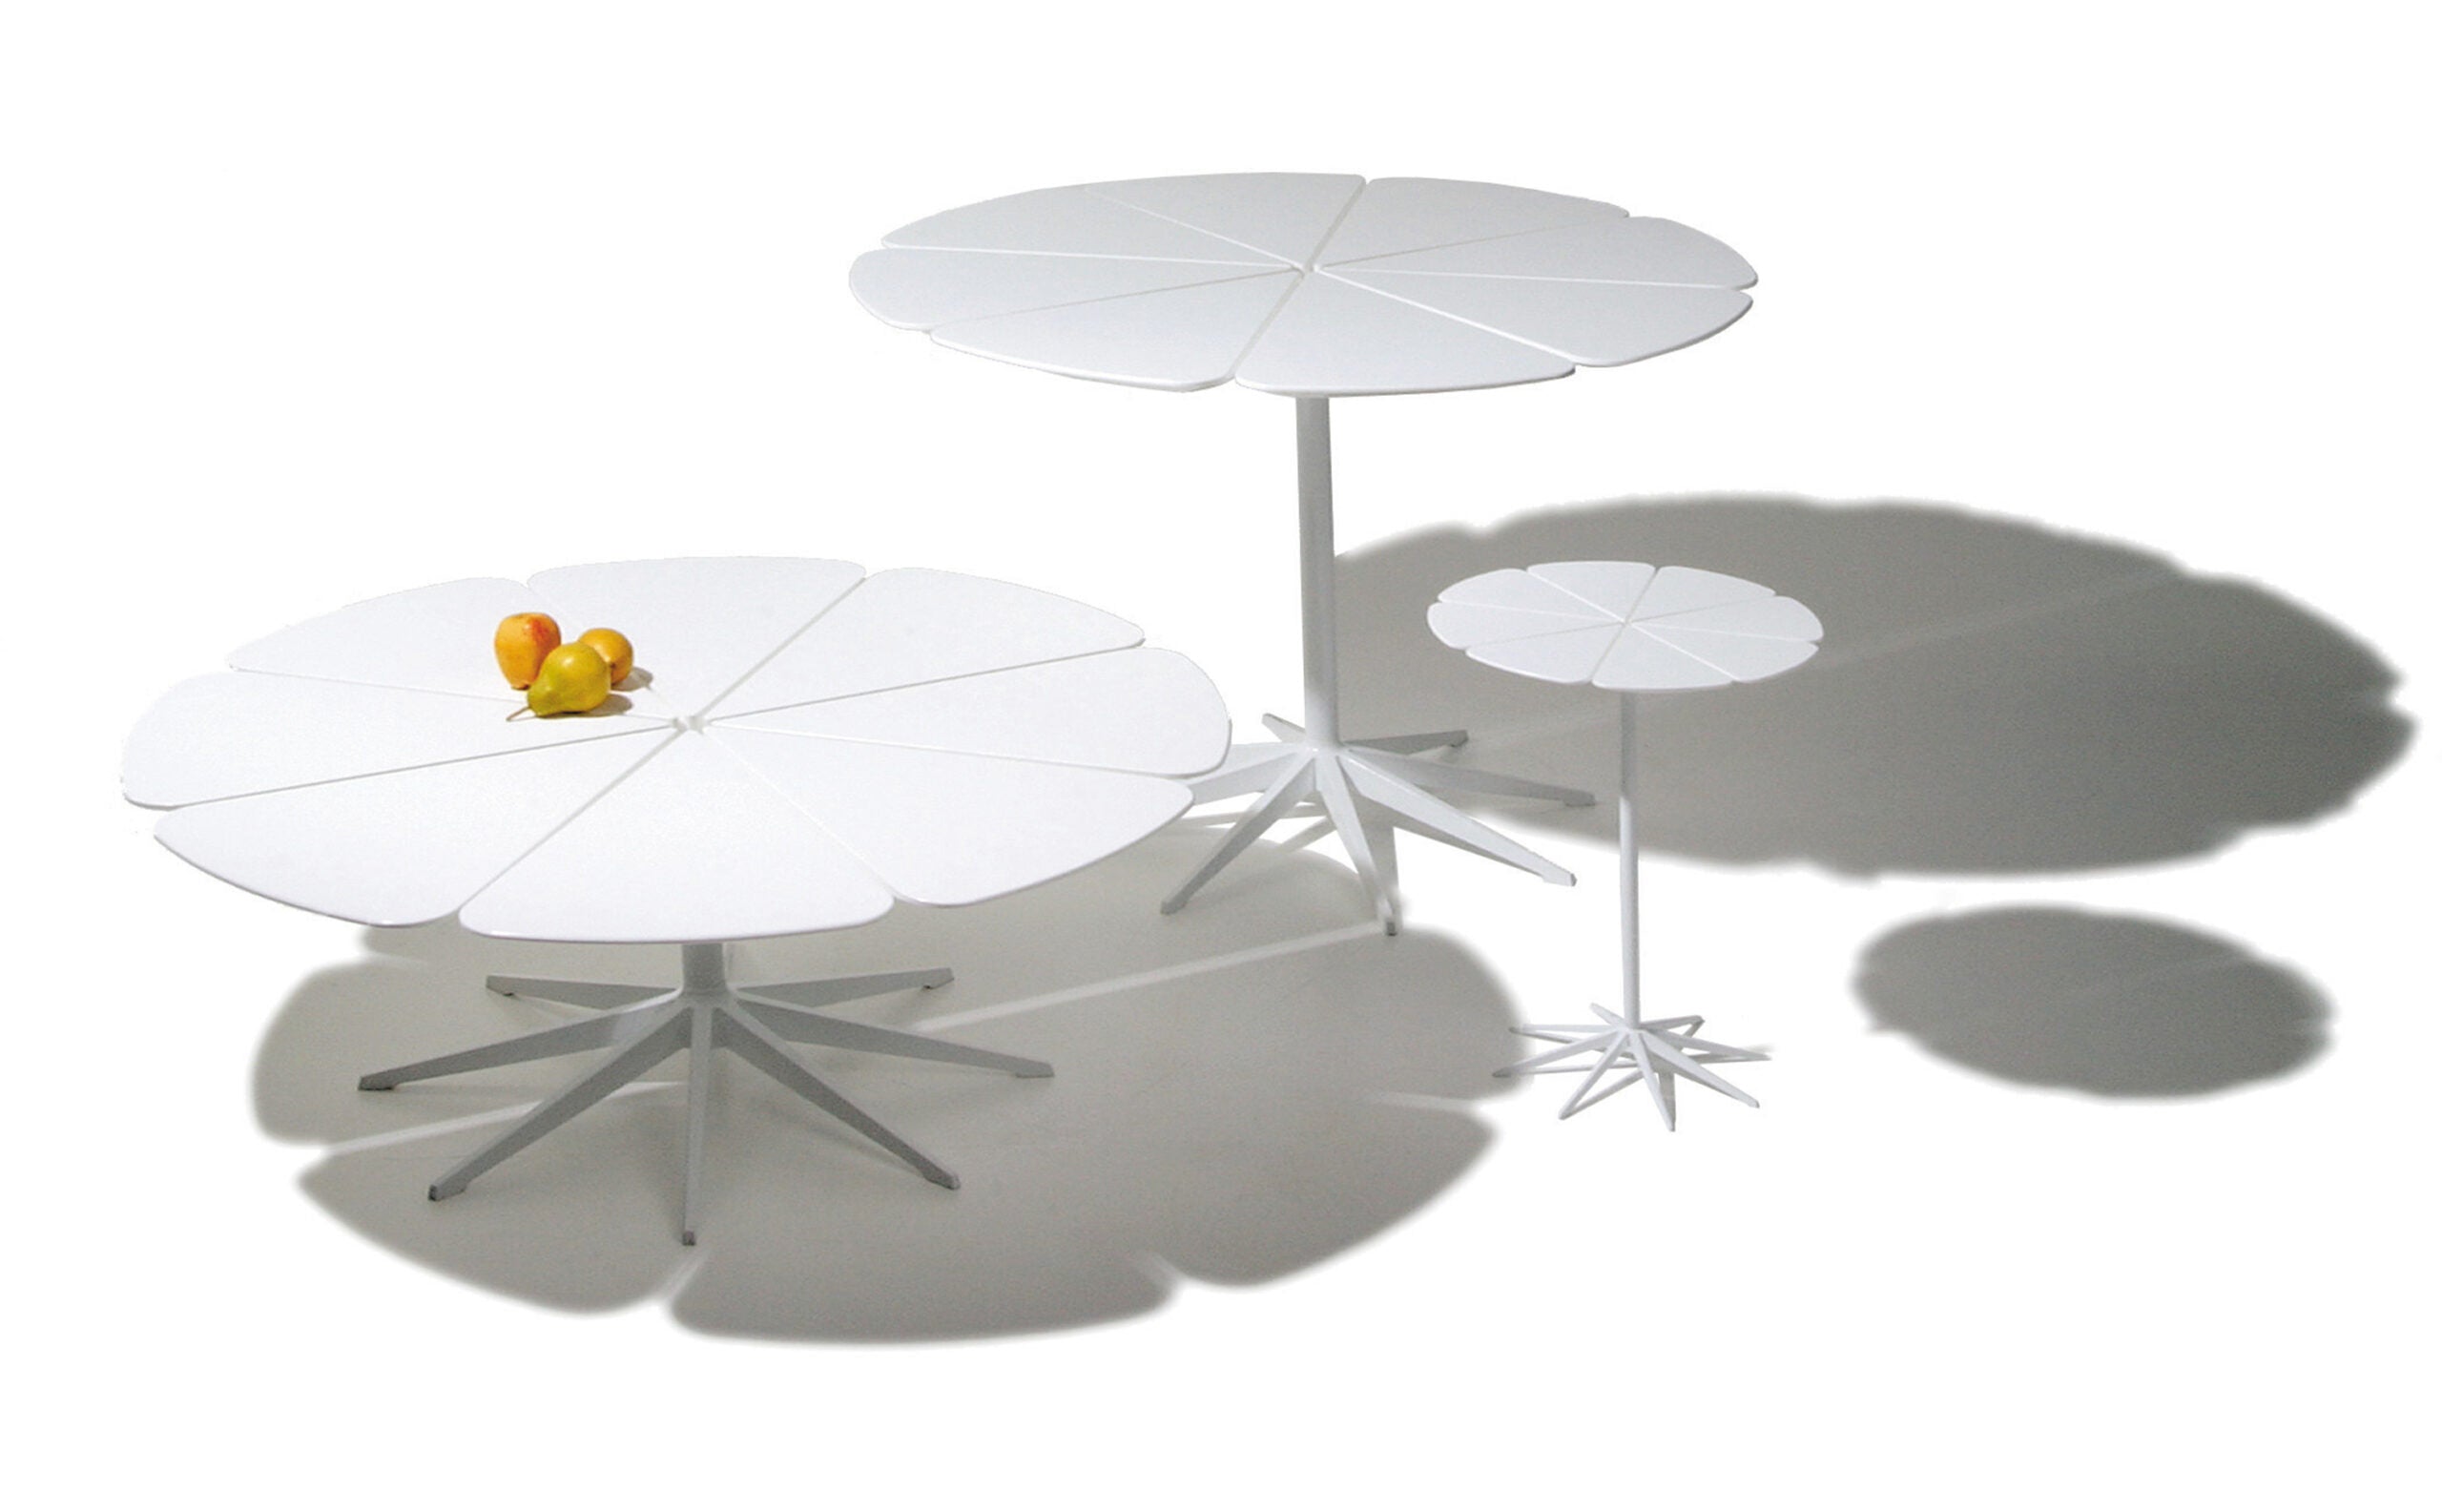 The Richard Schultz Petal Collection from Knoll.